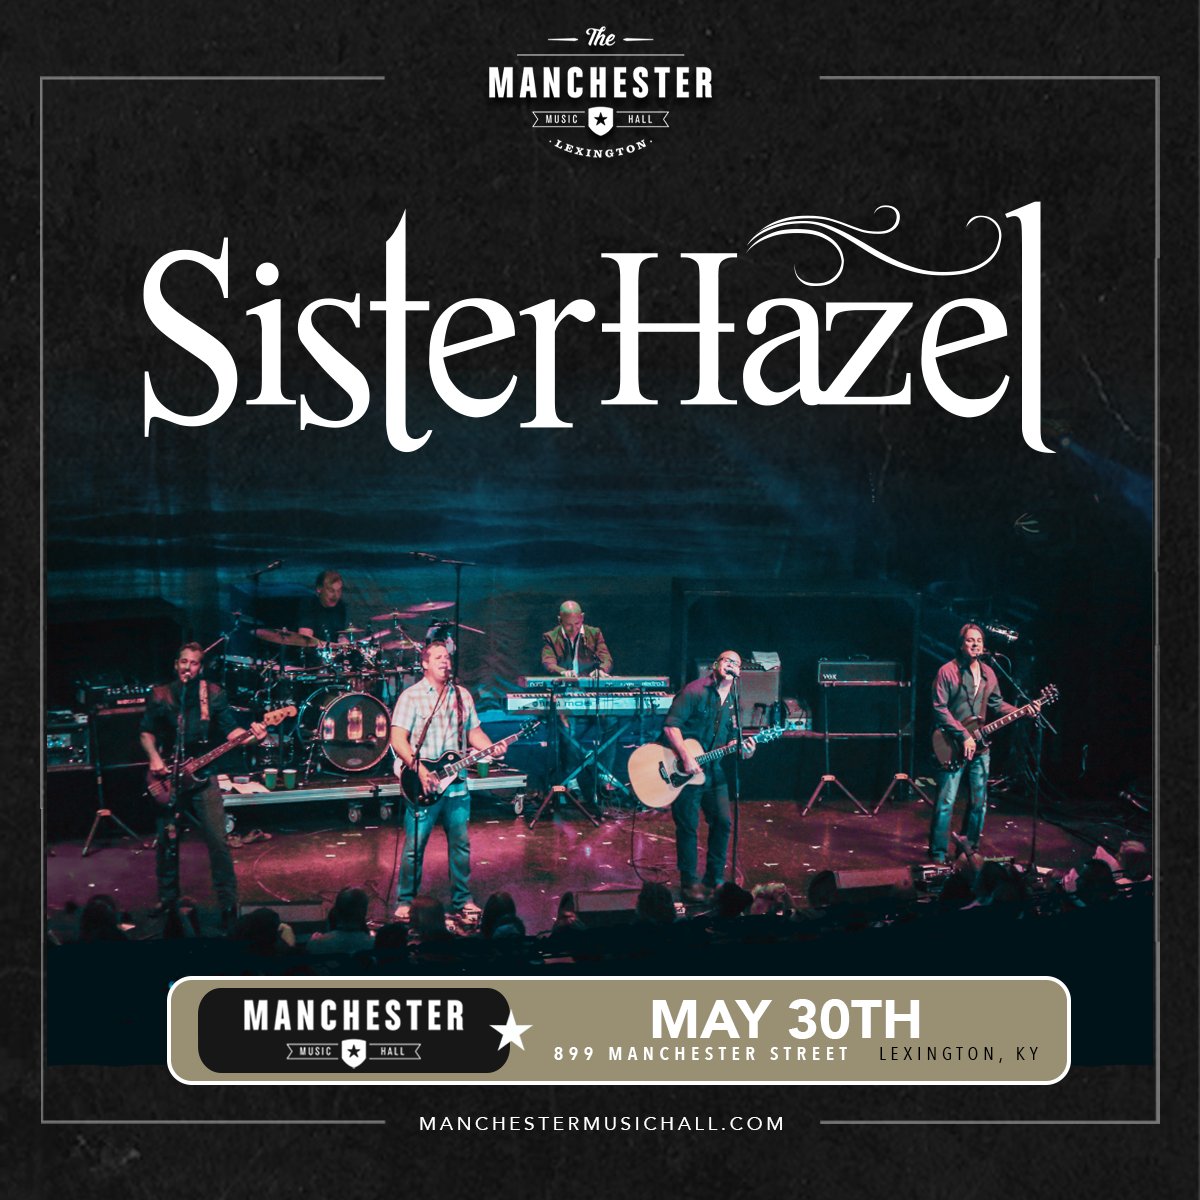 MANCHESTER MUSIC HALL, LEXINGTON, KY! We will see you on 5/30! 🎟️ - bit.ly/3ThPVR6